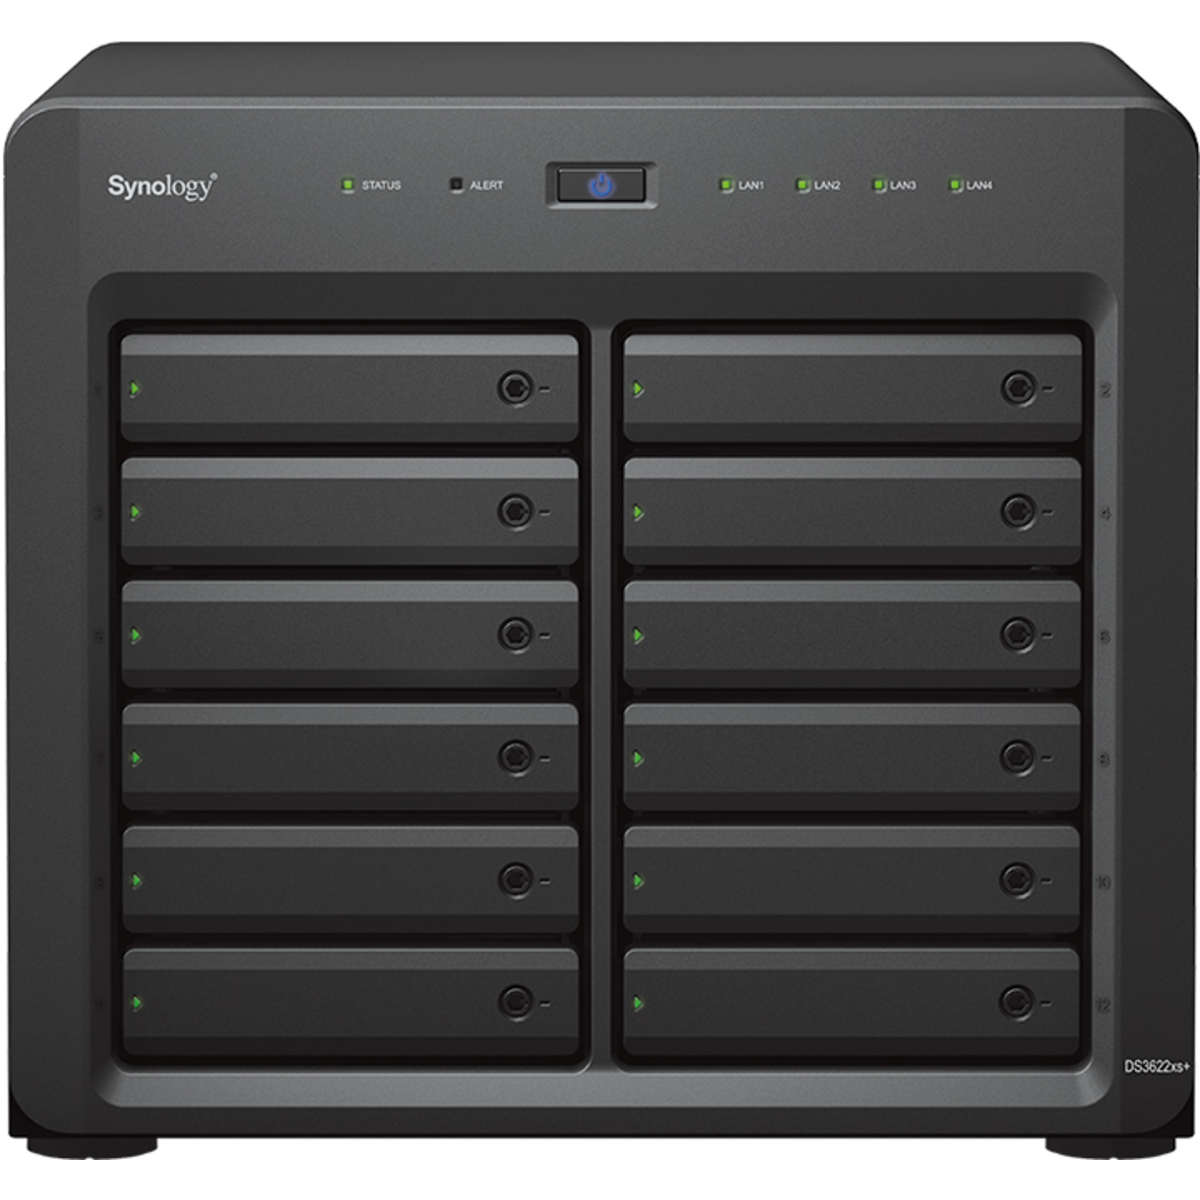 Synology DiskStation DS3622xs+ 48tb 12-Bay Desktop Multimedia / Power User / Business NAS - Network Attached Storage Device 8x6tb Western Digital Red Pro WD6003FFBX 3.5 7200rpm SATA 6Gb/s HDD NAS Class Drives Installed - Burn-In Tested DiskStation DS3622xs+